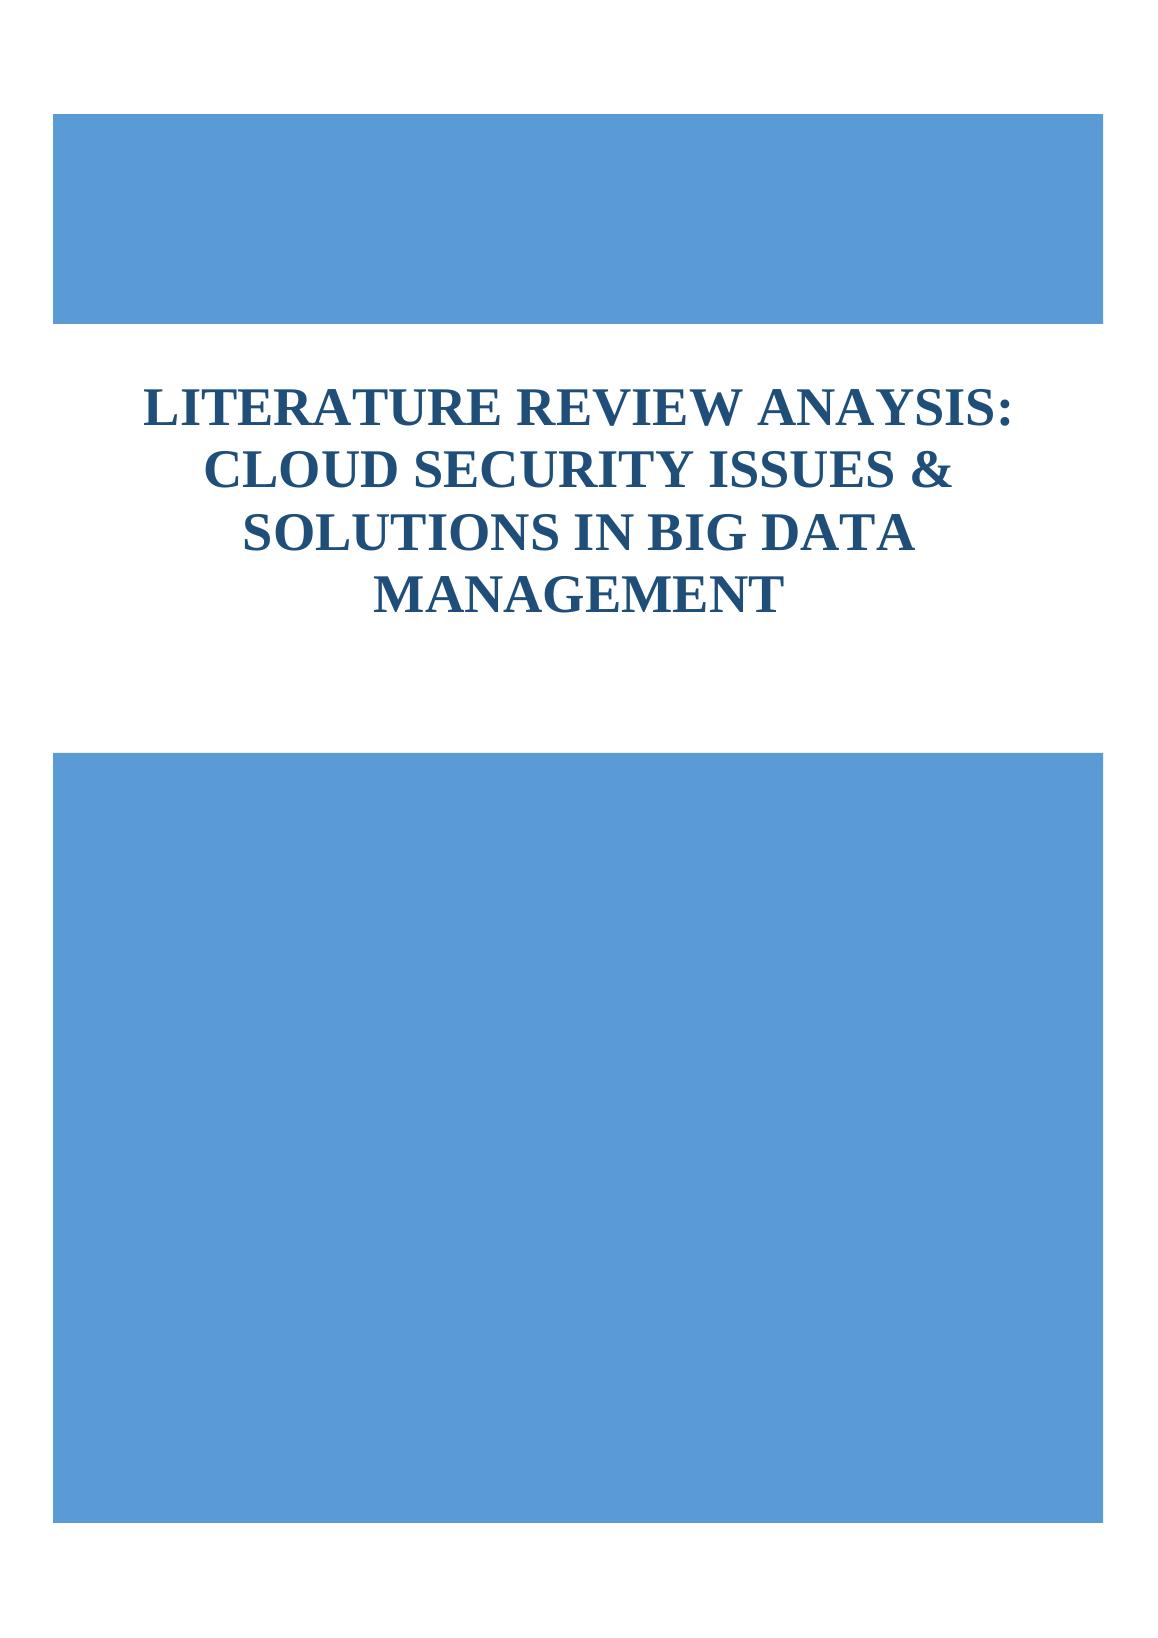 Literature Review Assignment: Cloud Security Issues & Solutions_1